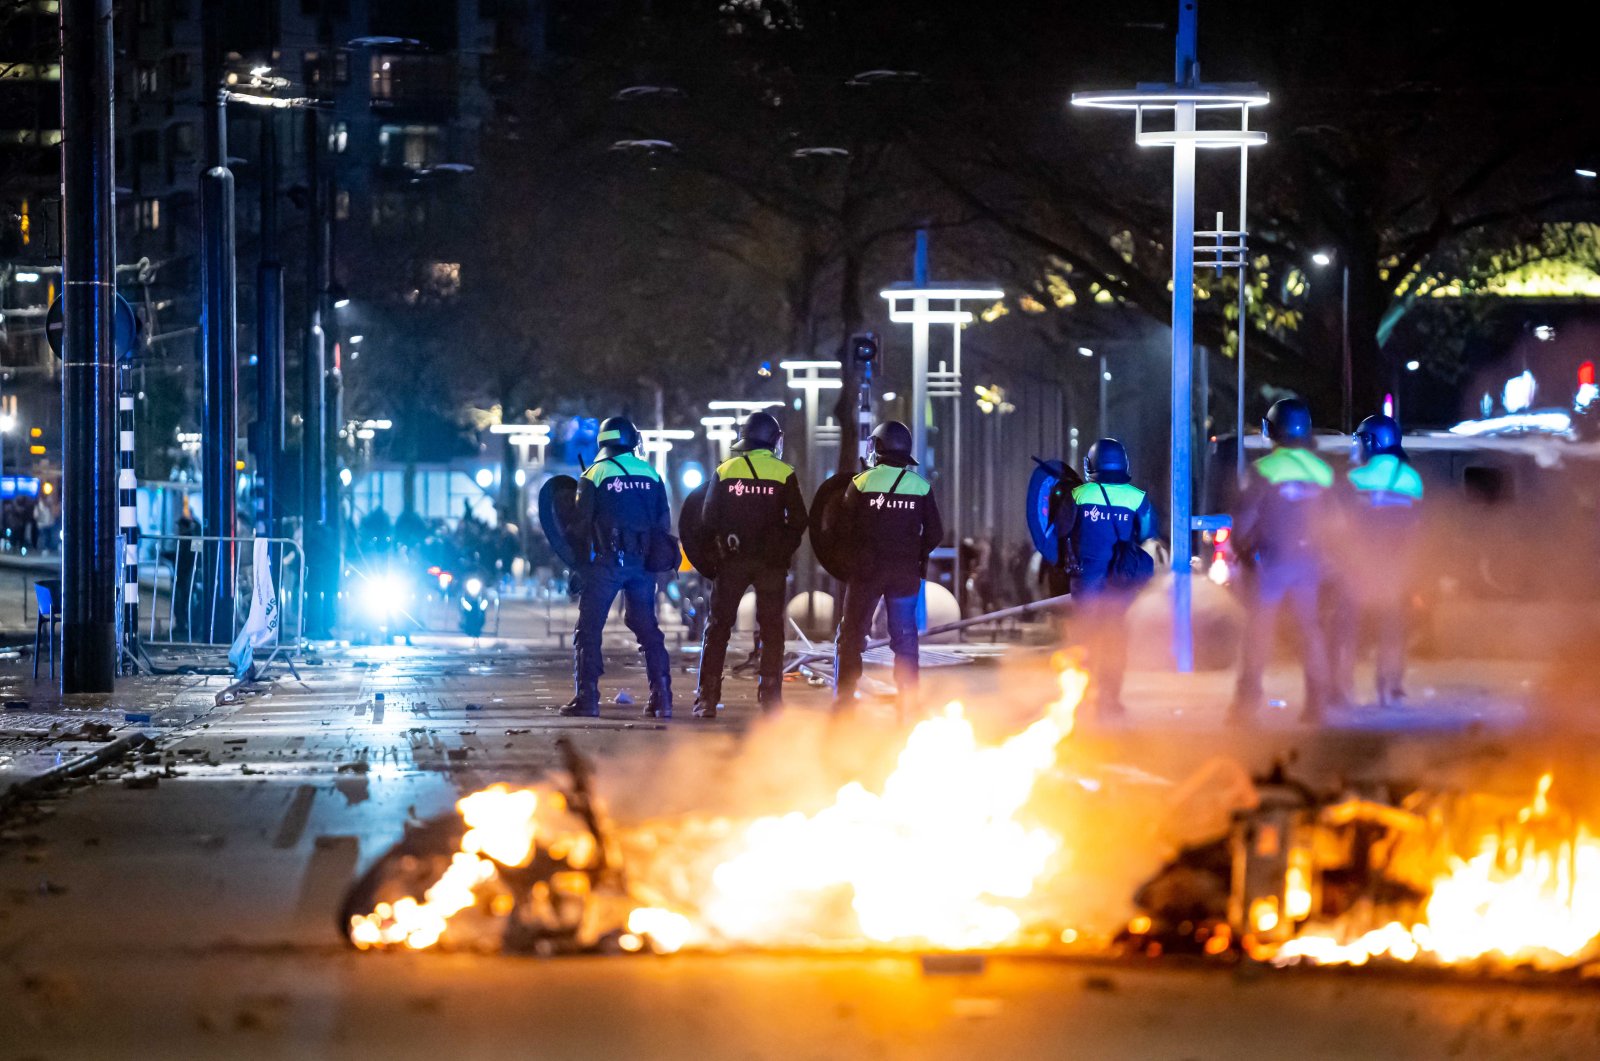 Police stand near burning objects after a protest against the &#039;2G policy&#039; turned into riots, with protesters setting fires in the street and destroying police cars and street furniture, Rotterdam, Netherlands, Nov. 19, 2021. (EPA Photo)